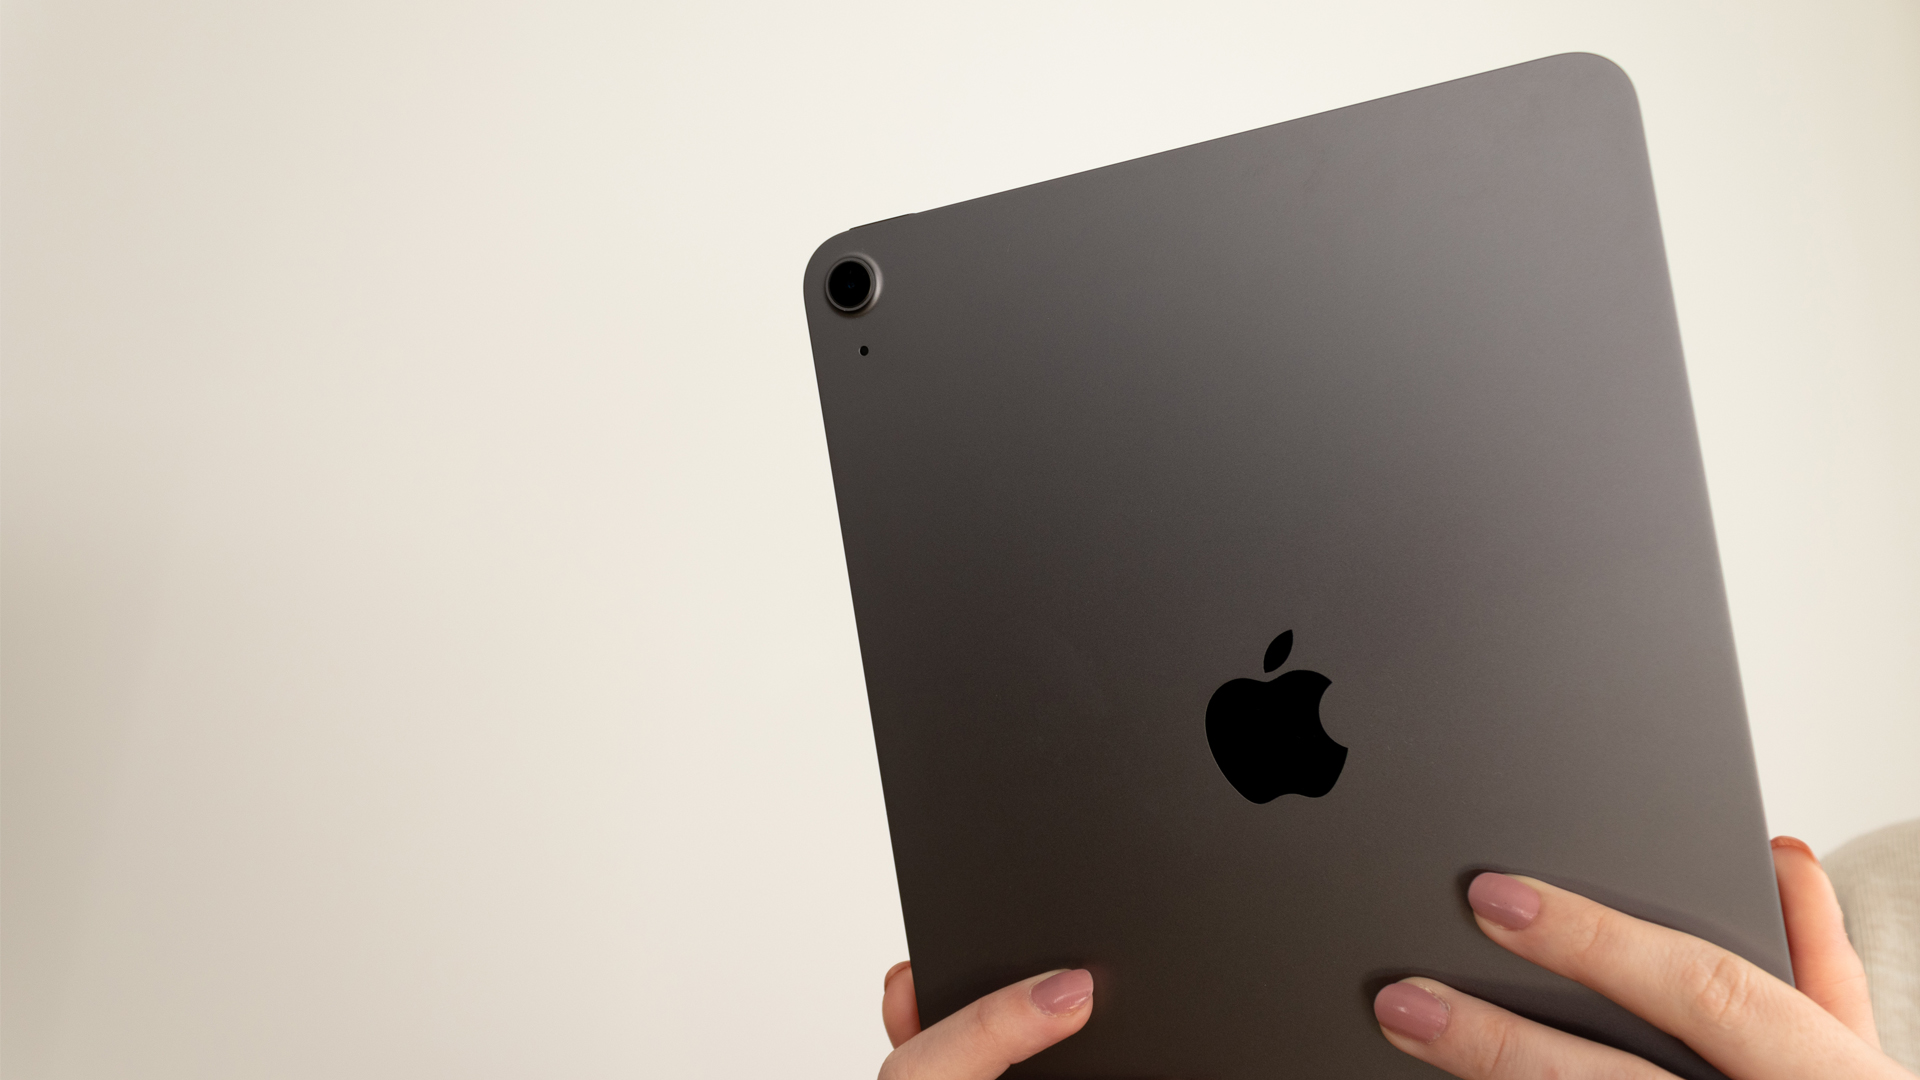 A photograph of the rear of an Apple iPad Air being held up in front of a wall